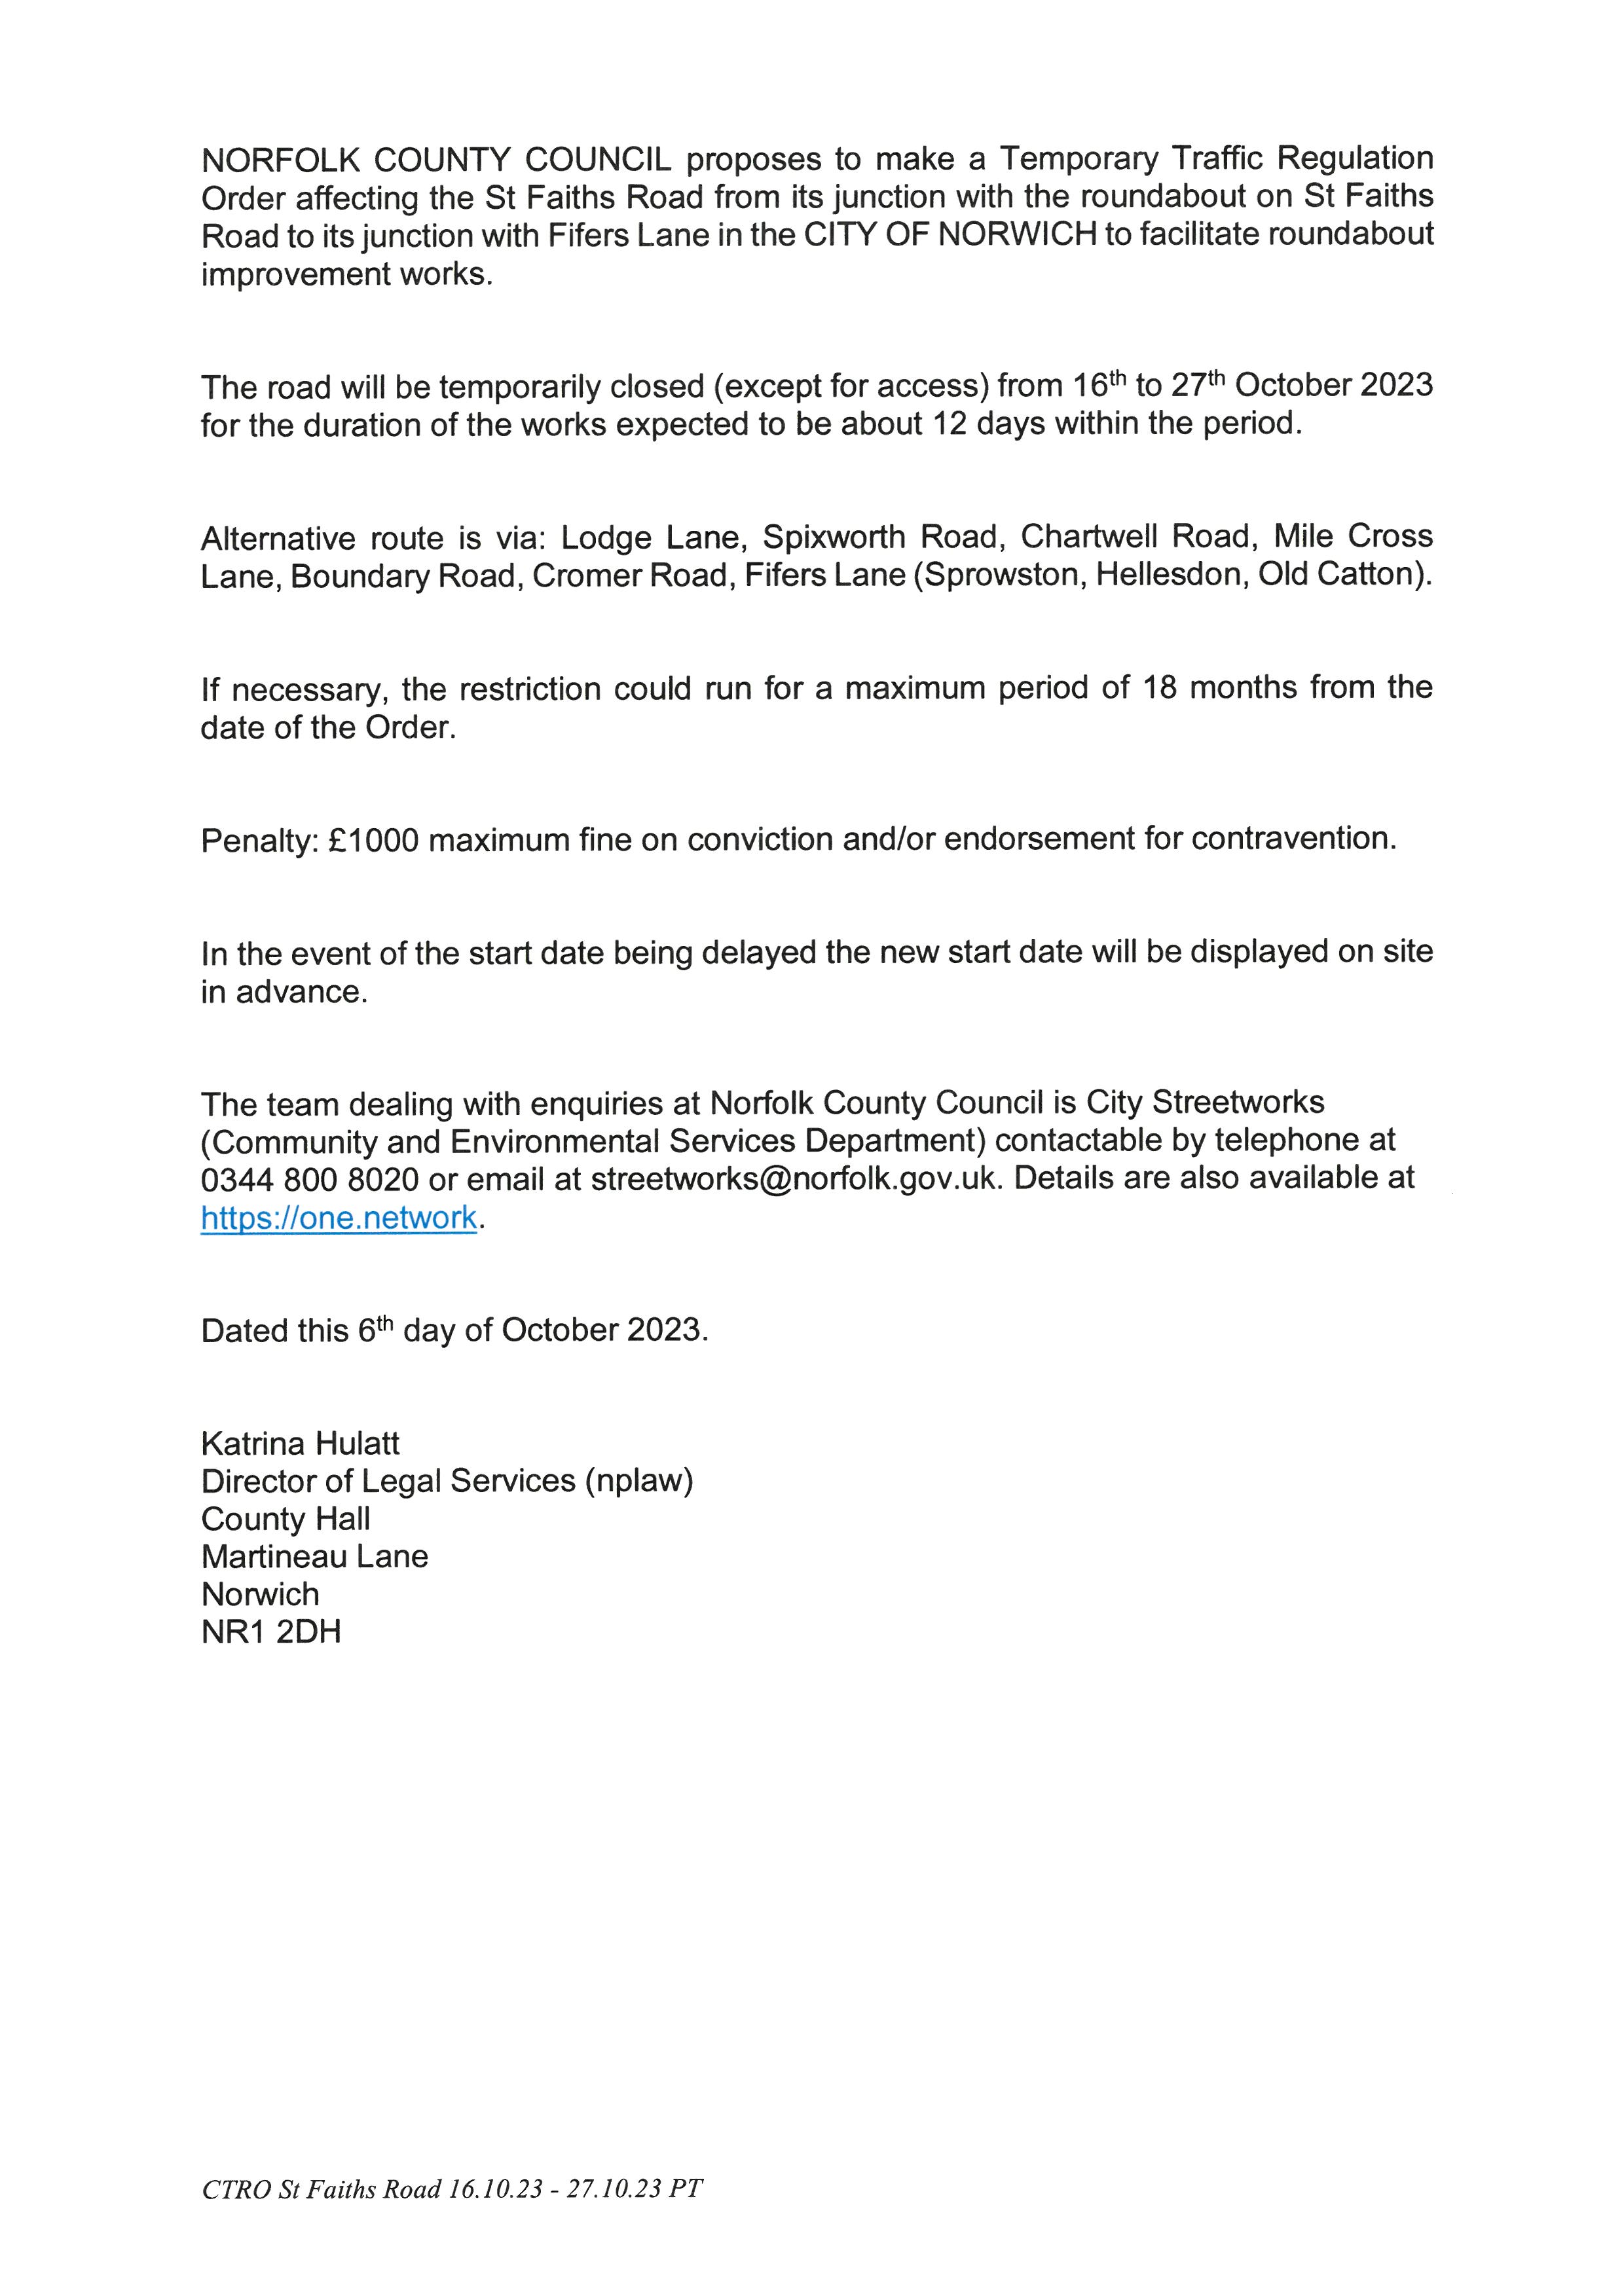 Road Closure - St Faiths Road Roundabout 16th October 2023